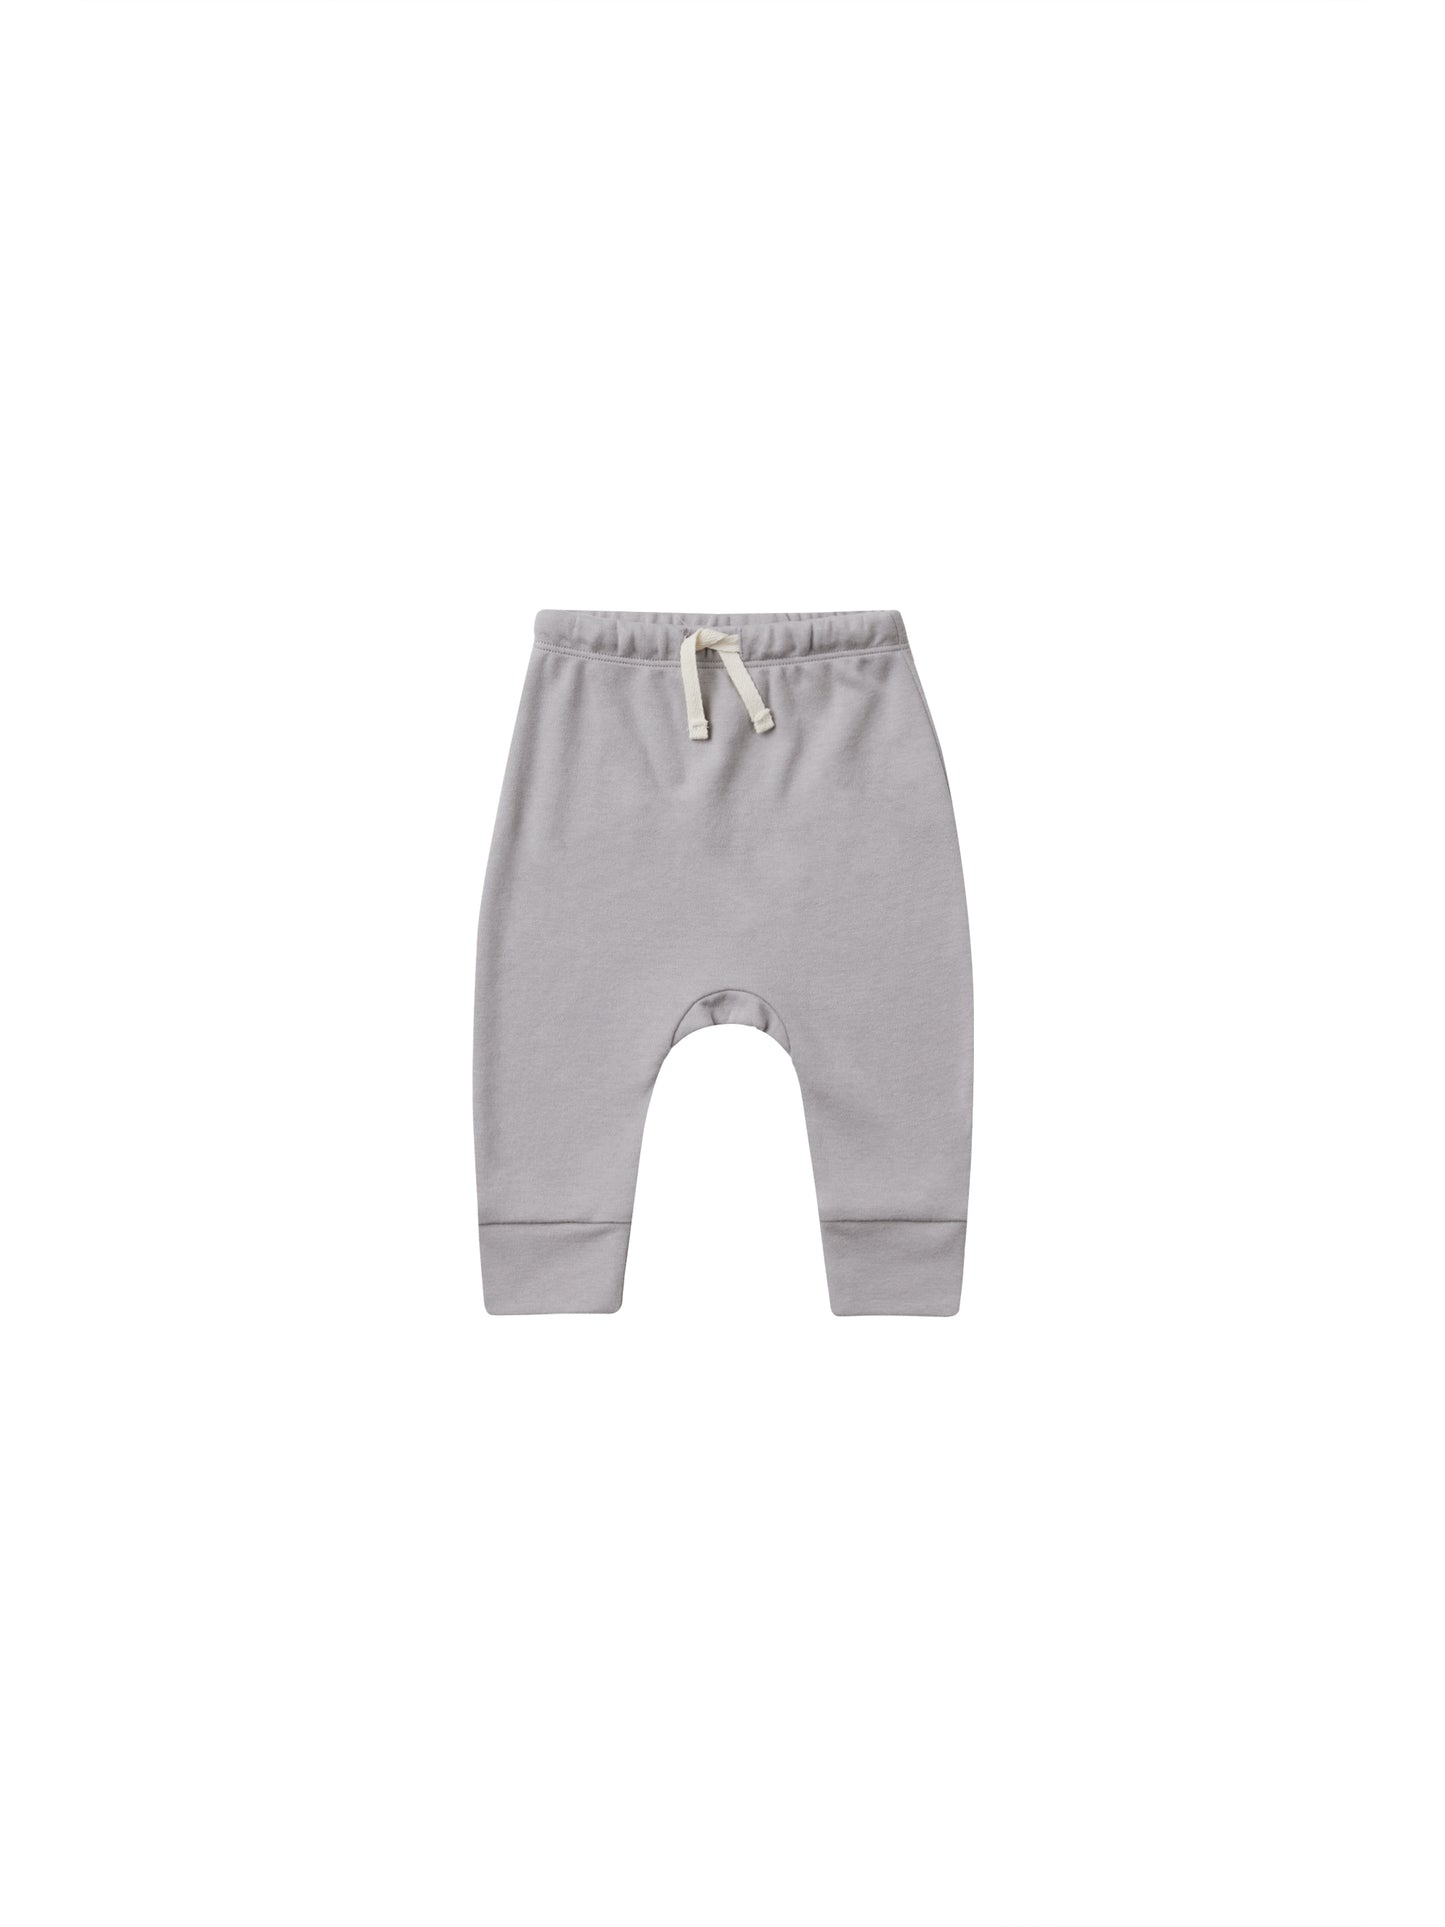 Quincy Mae Drawstring Pant Periwinkle